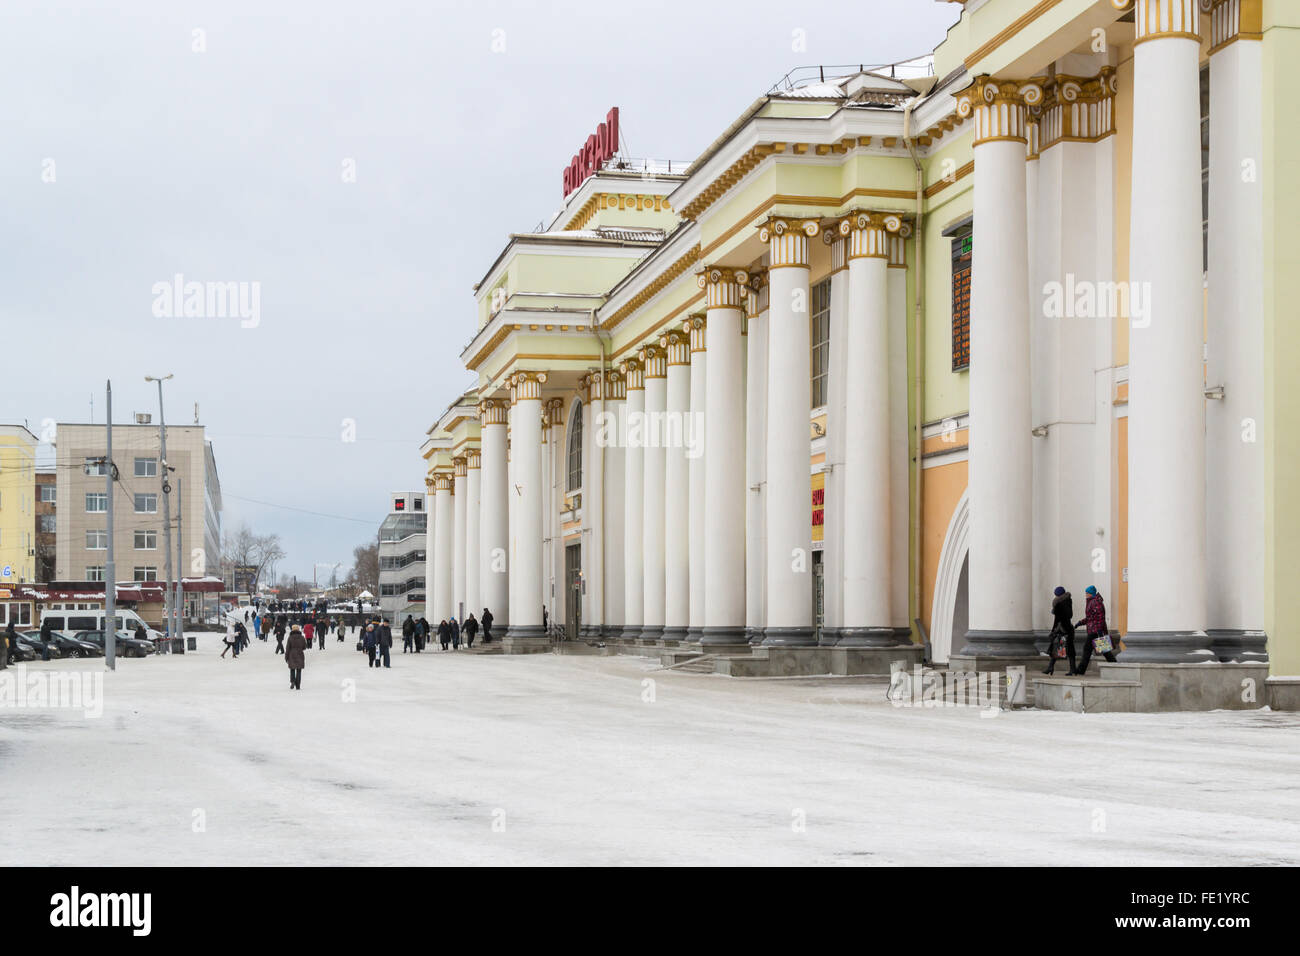 The main train station in Ekaterinburg serves as a central point of departure into the Stock Photo